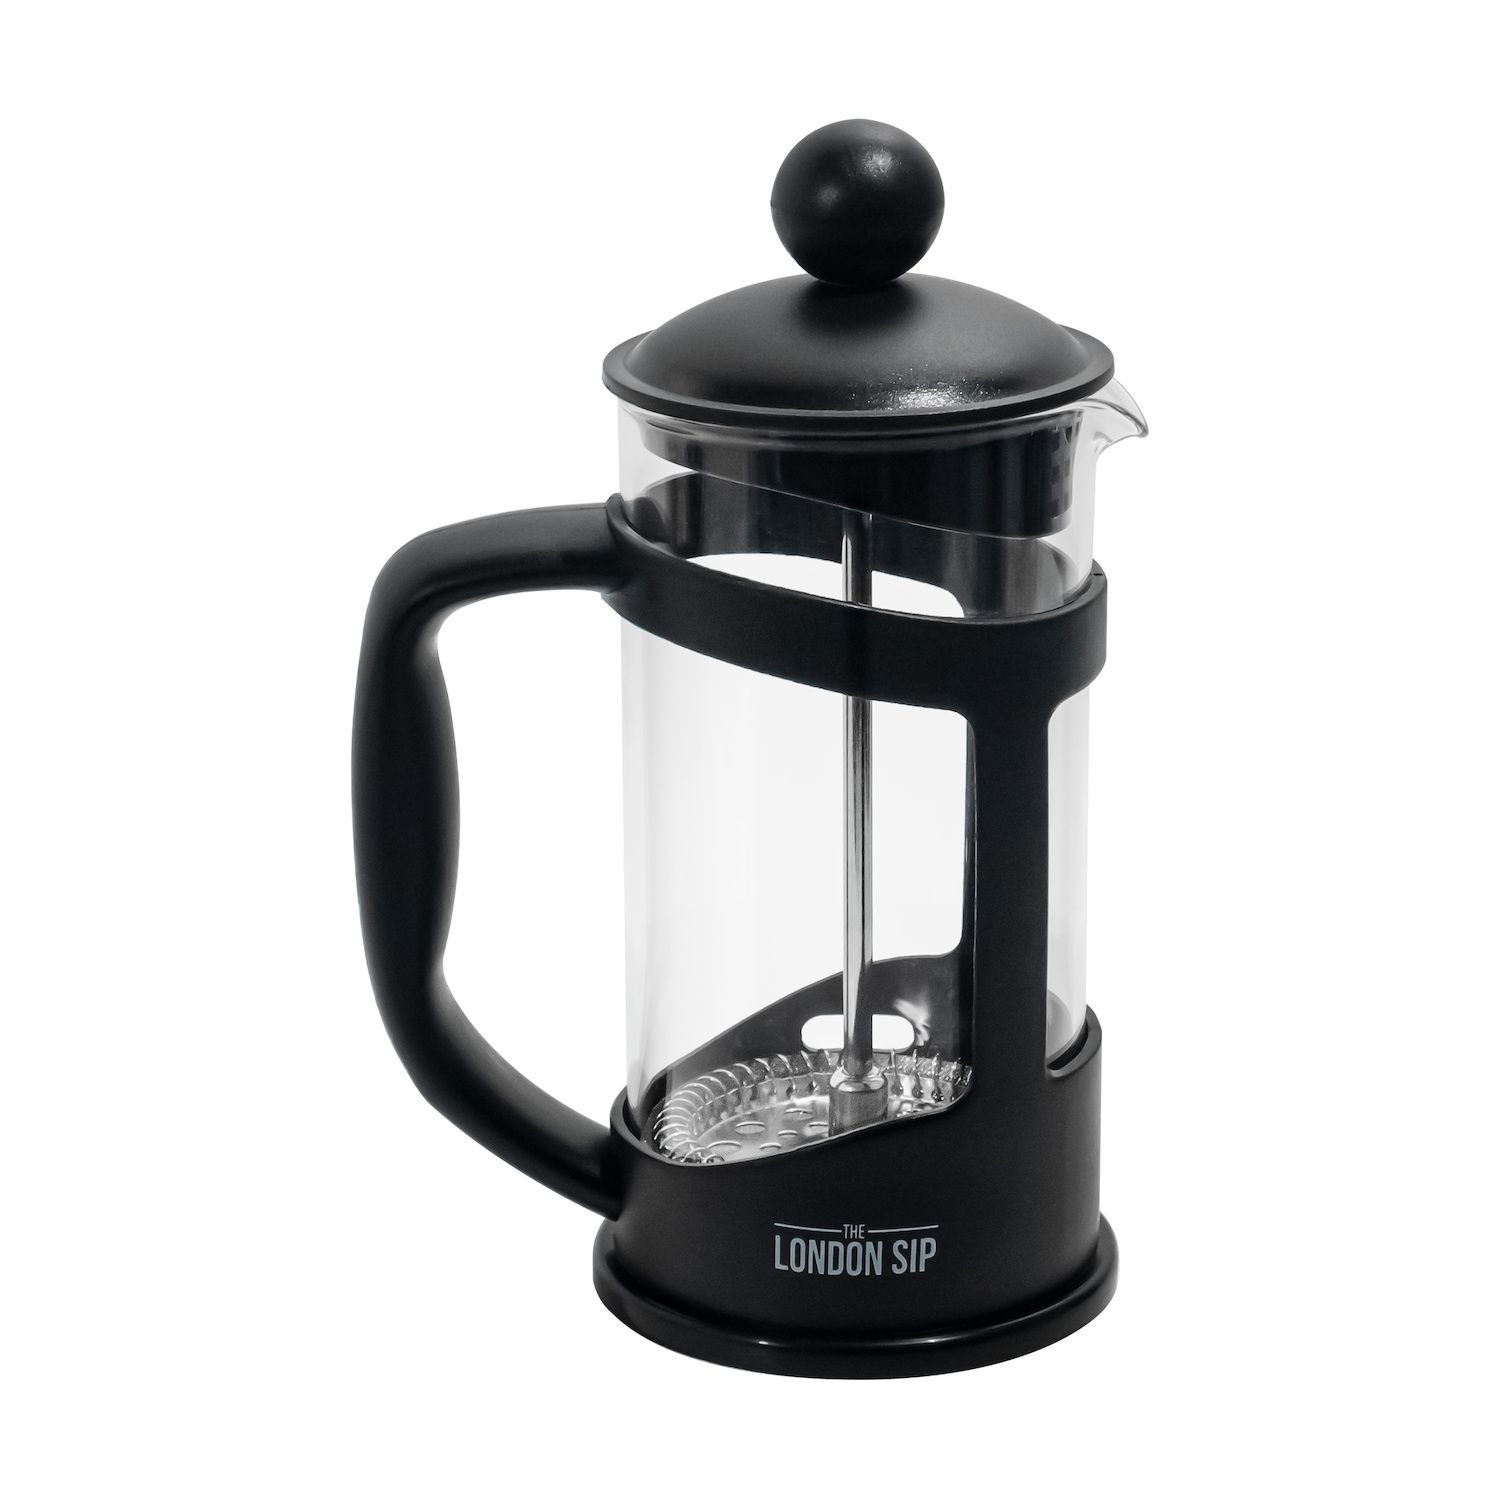 Mr. Coffee 14 Cup Glass Replacement Coffee Carafe